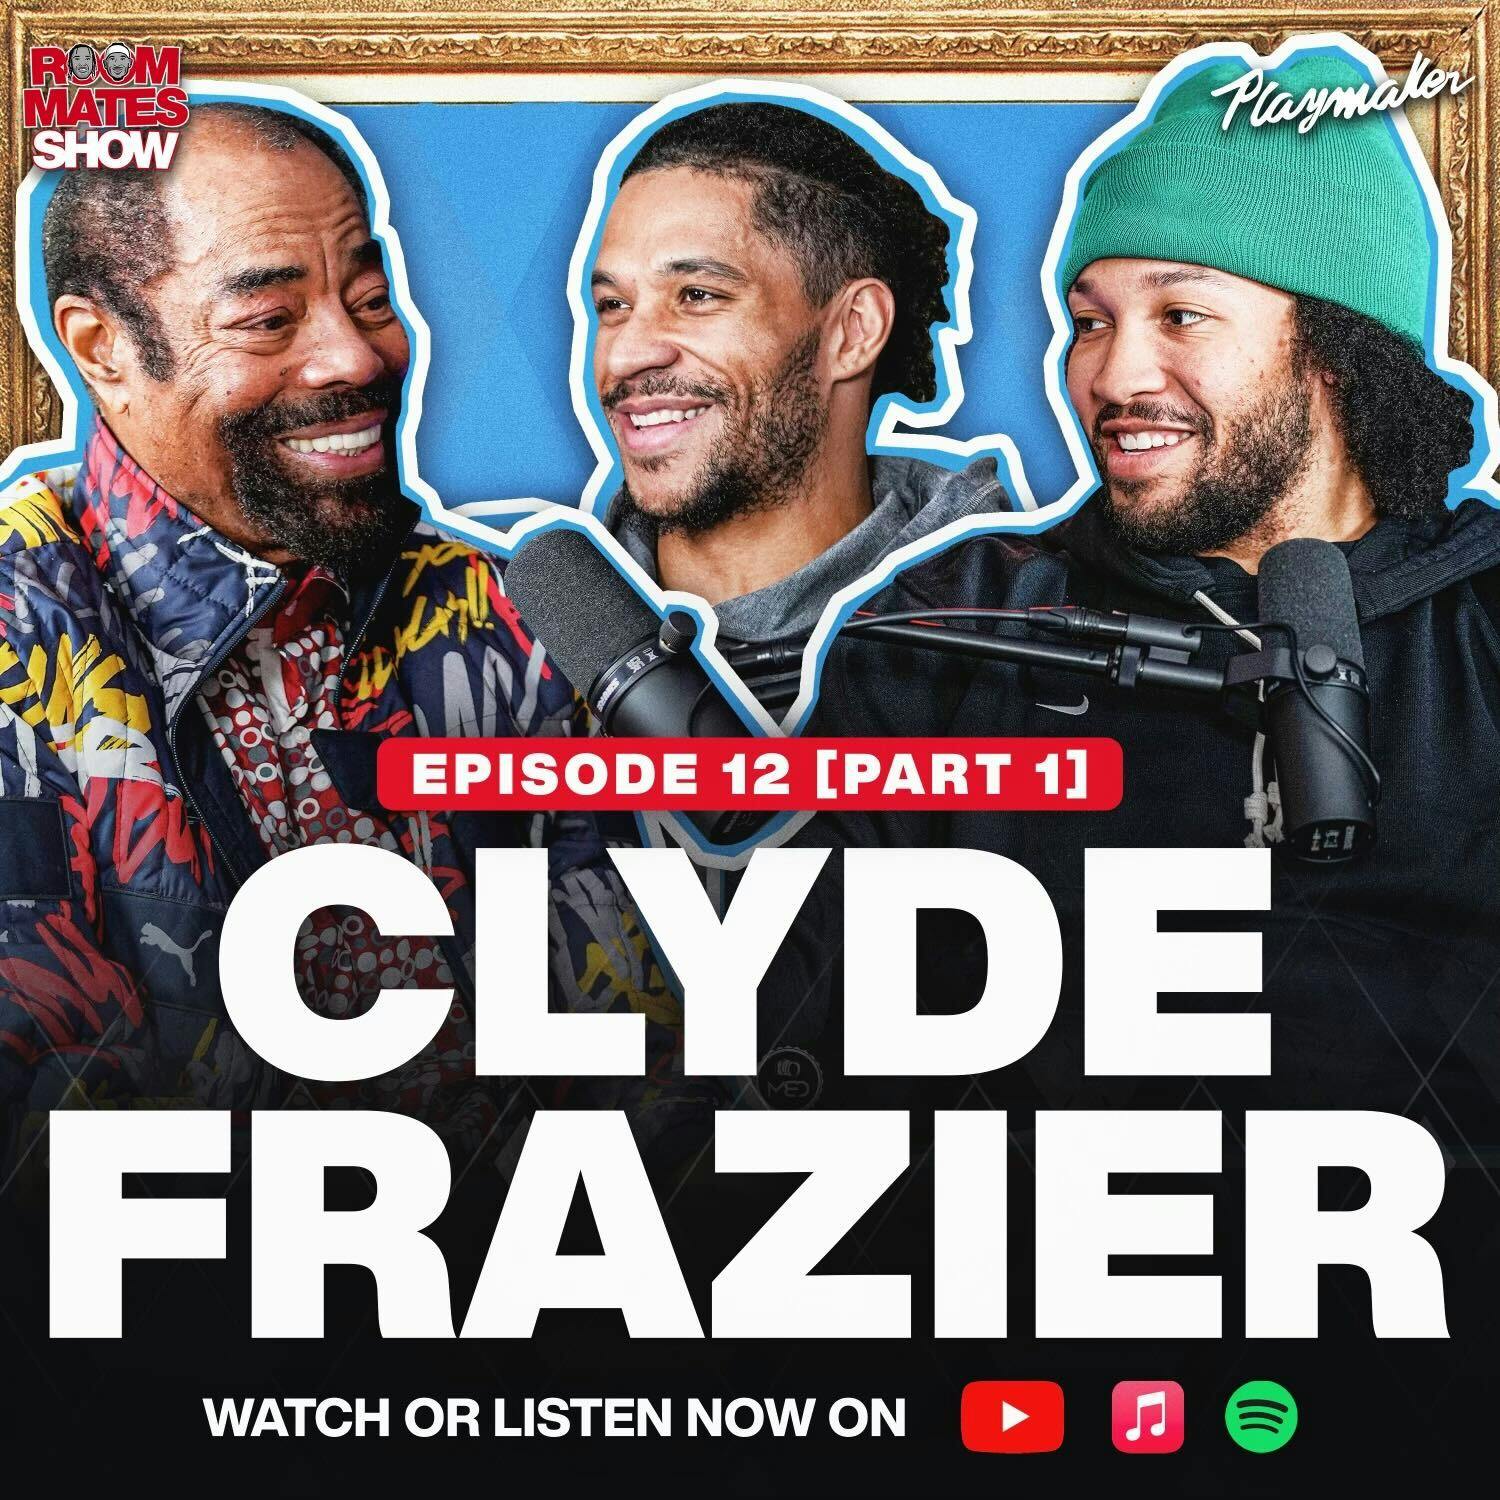 Clyde Frazier Talks Knicks Sixers, Compares Jalen & Josh’s Team To The Championship Knicks | Ep 12